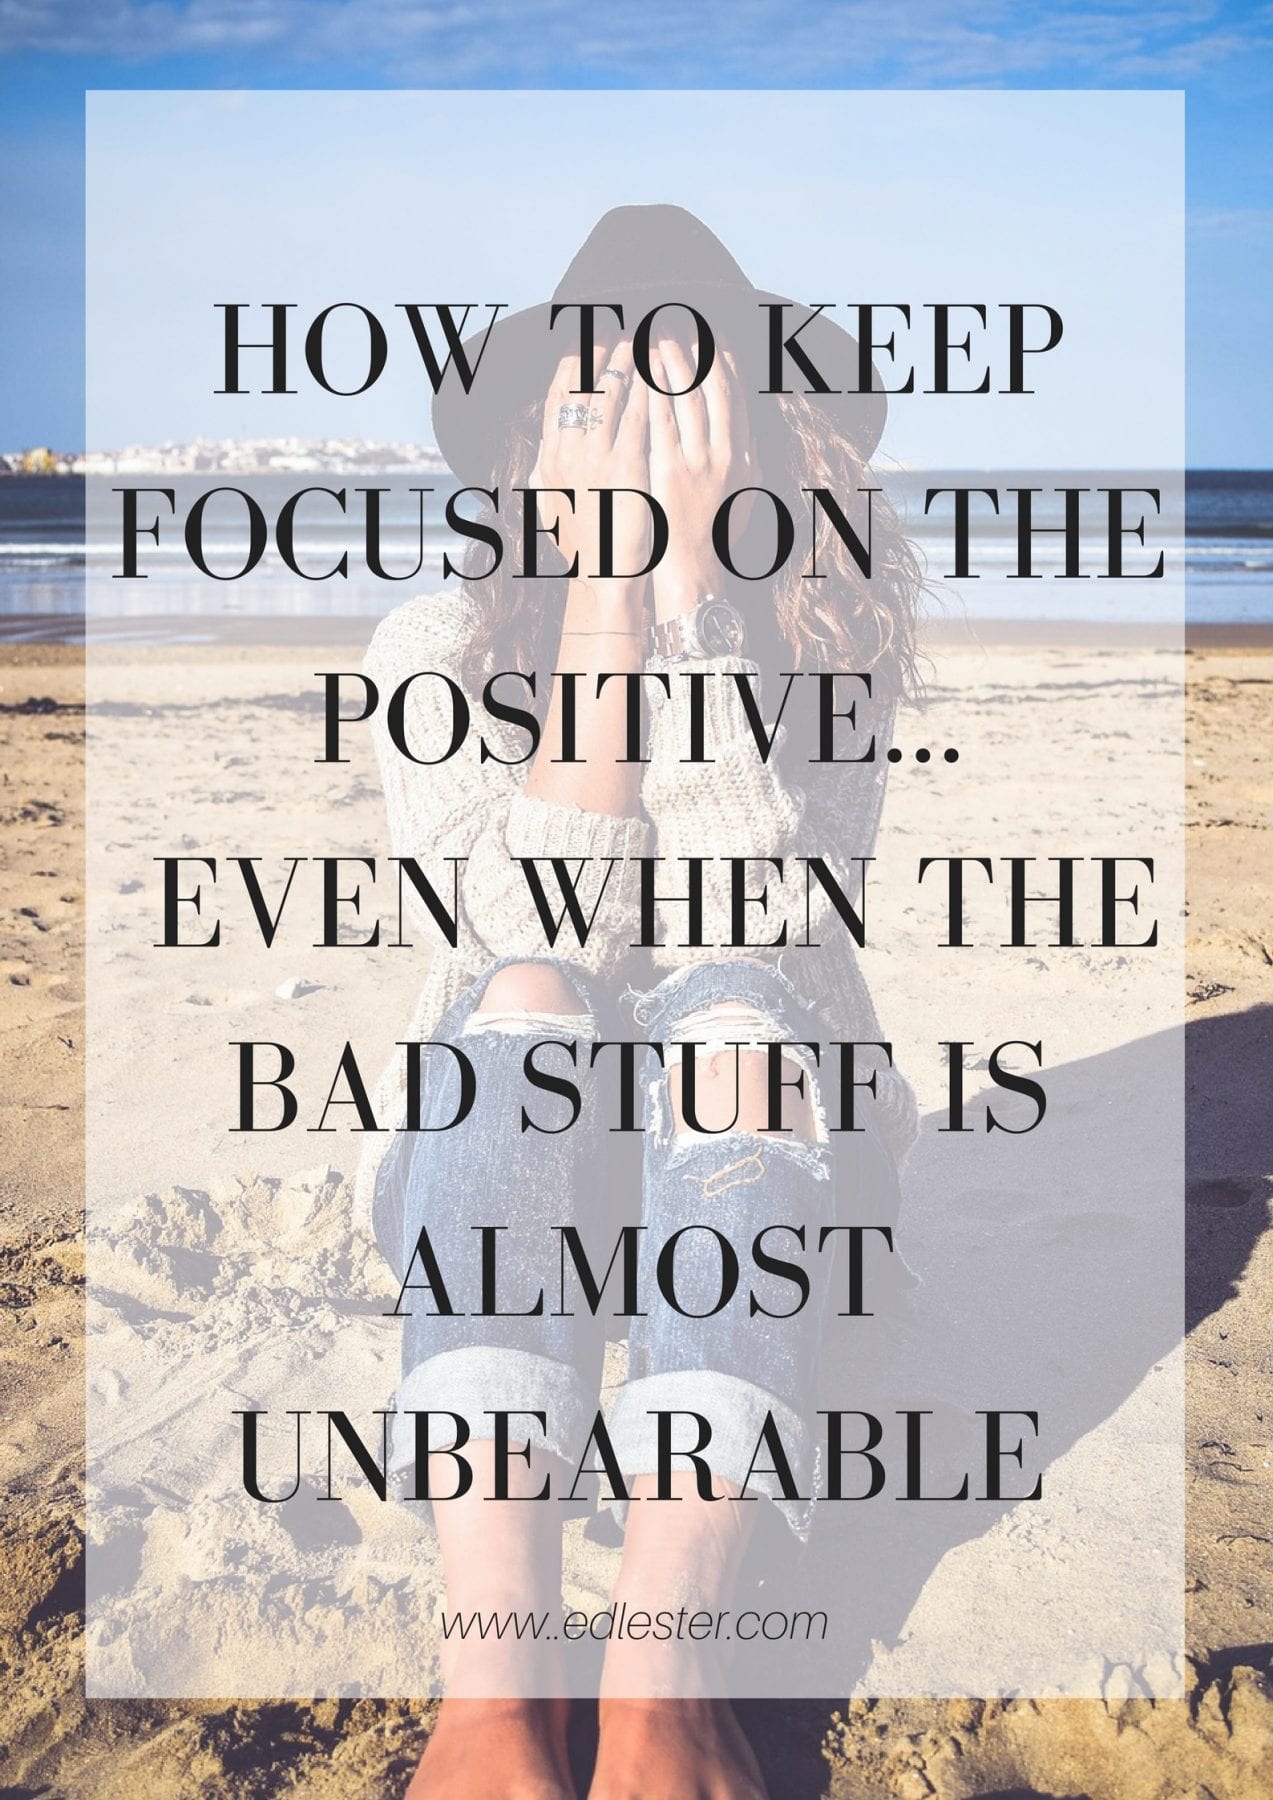 How to keep focused on the positive